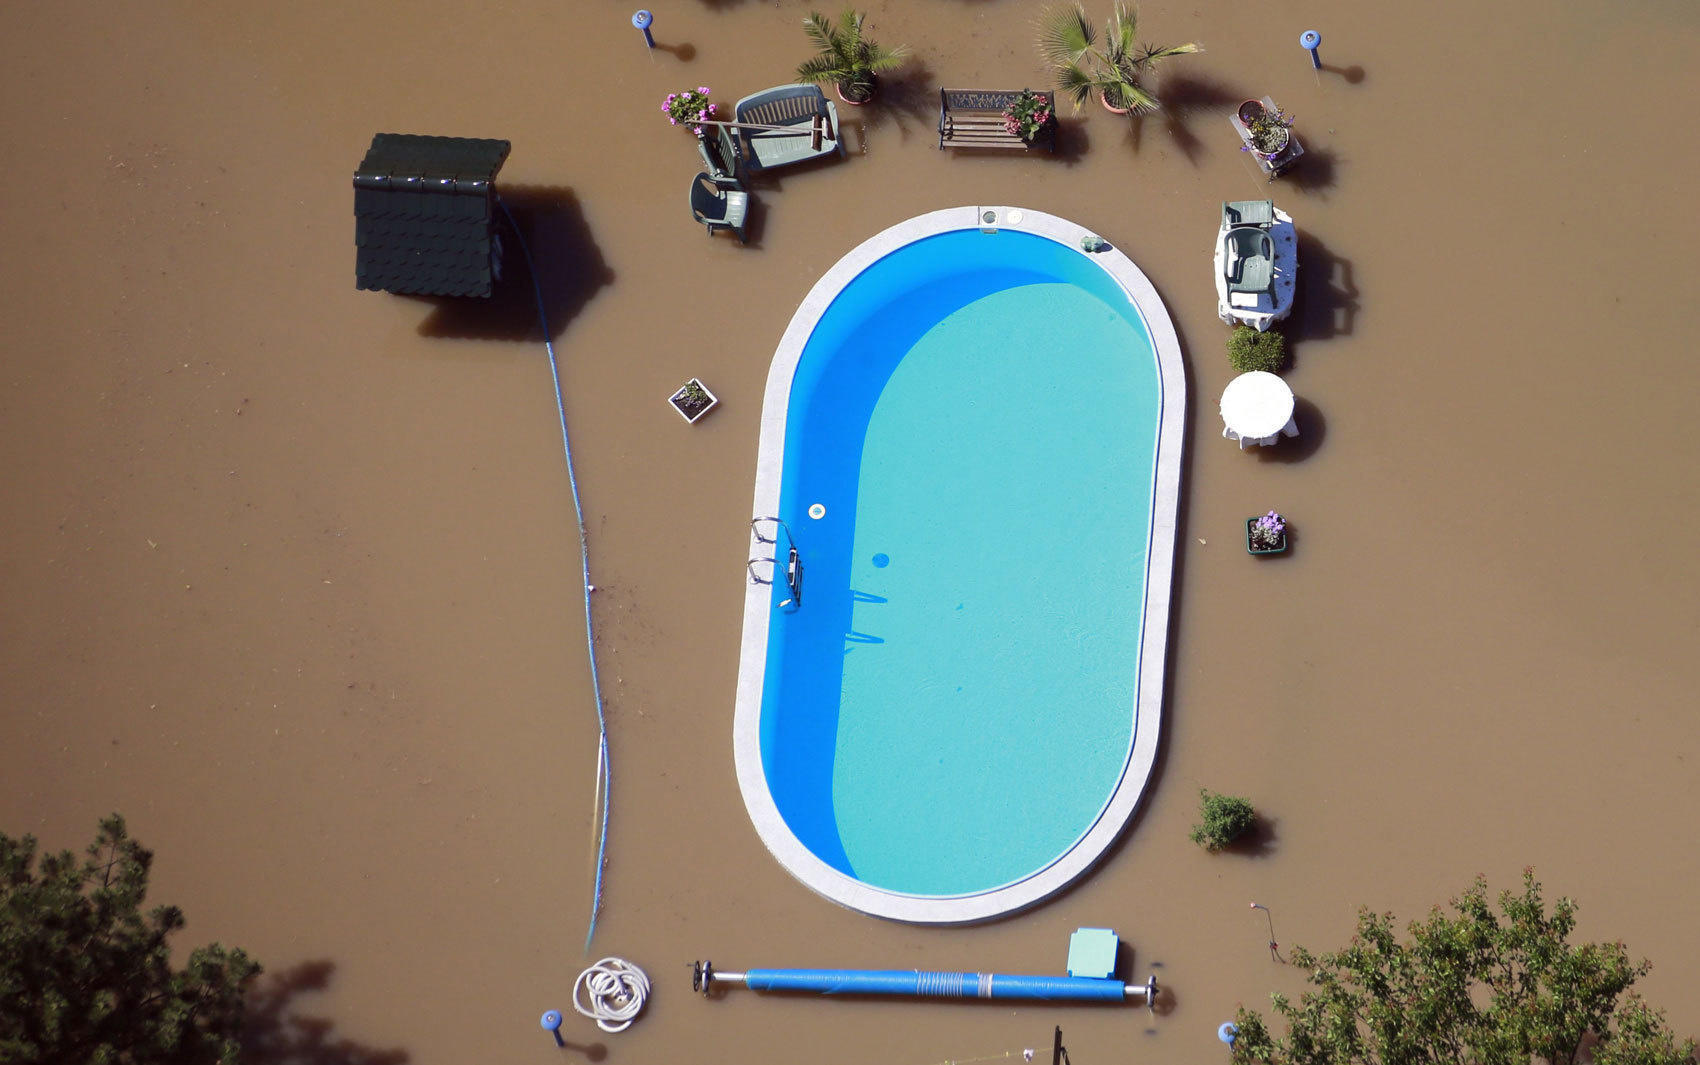 During this flood, the flood water almost spilled over into someone's pool,but didn't. 